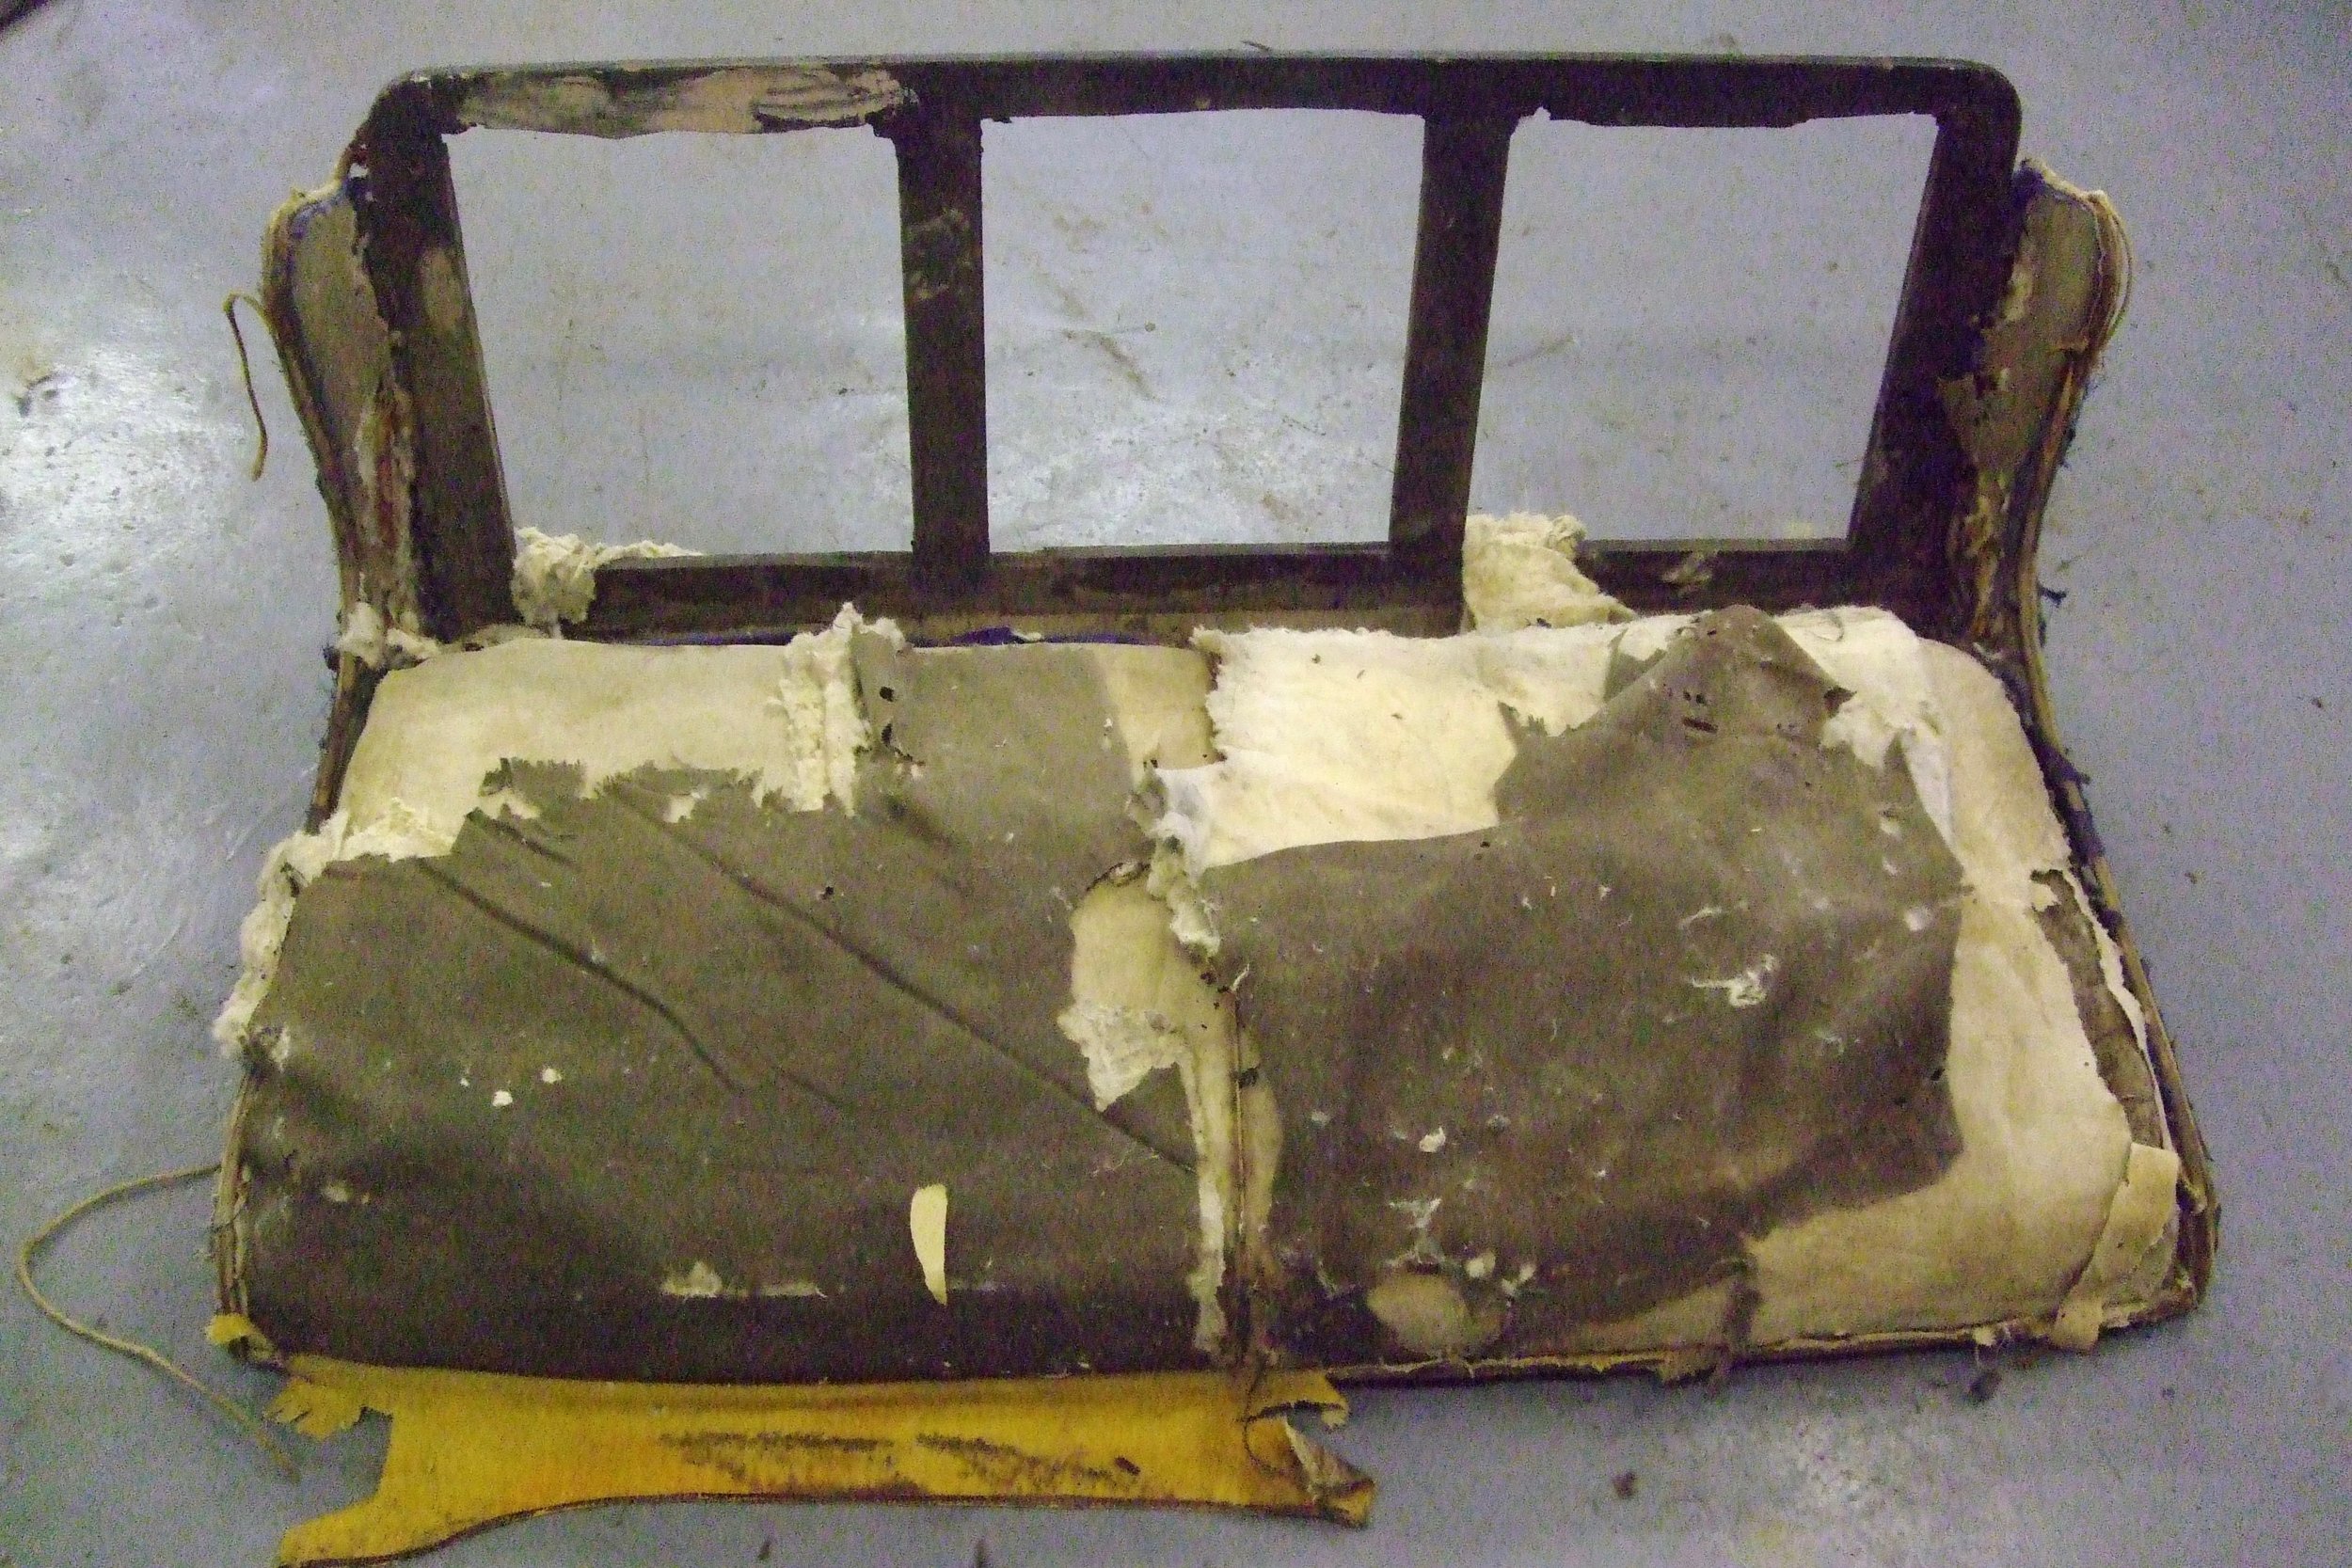 The remains of the original seat